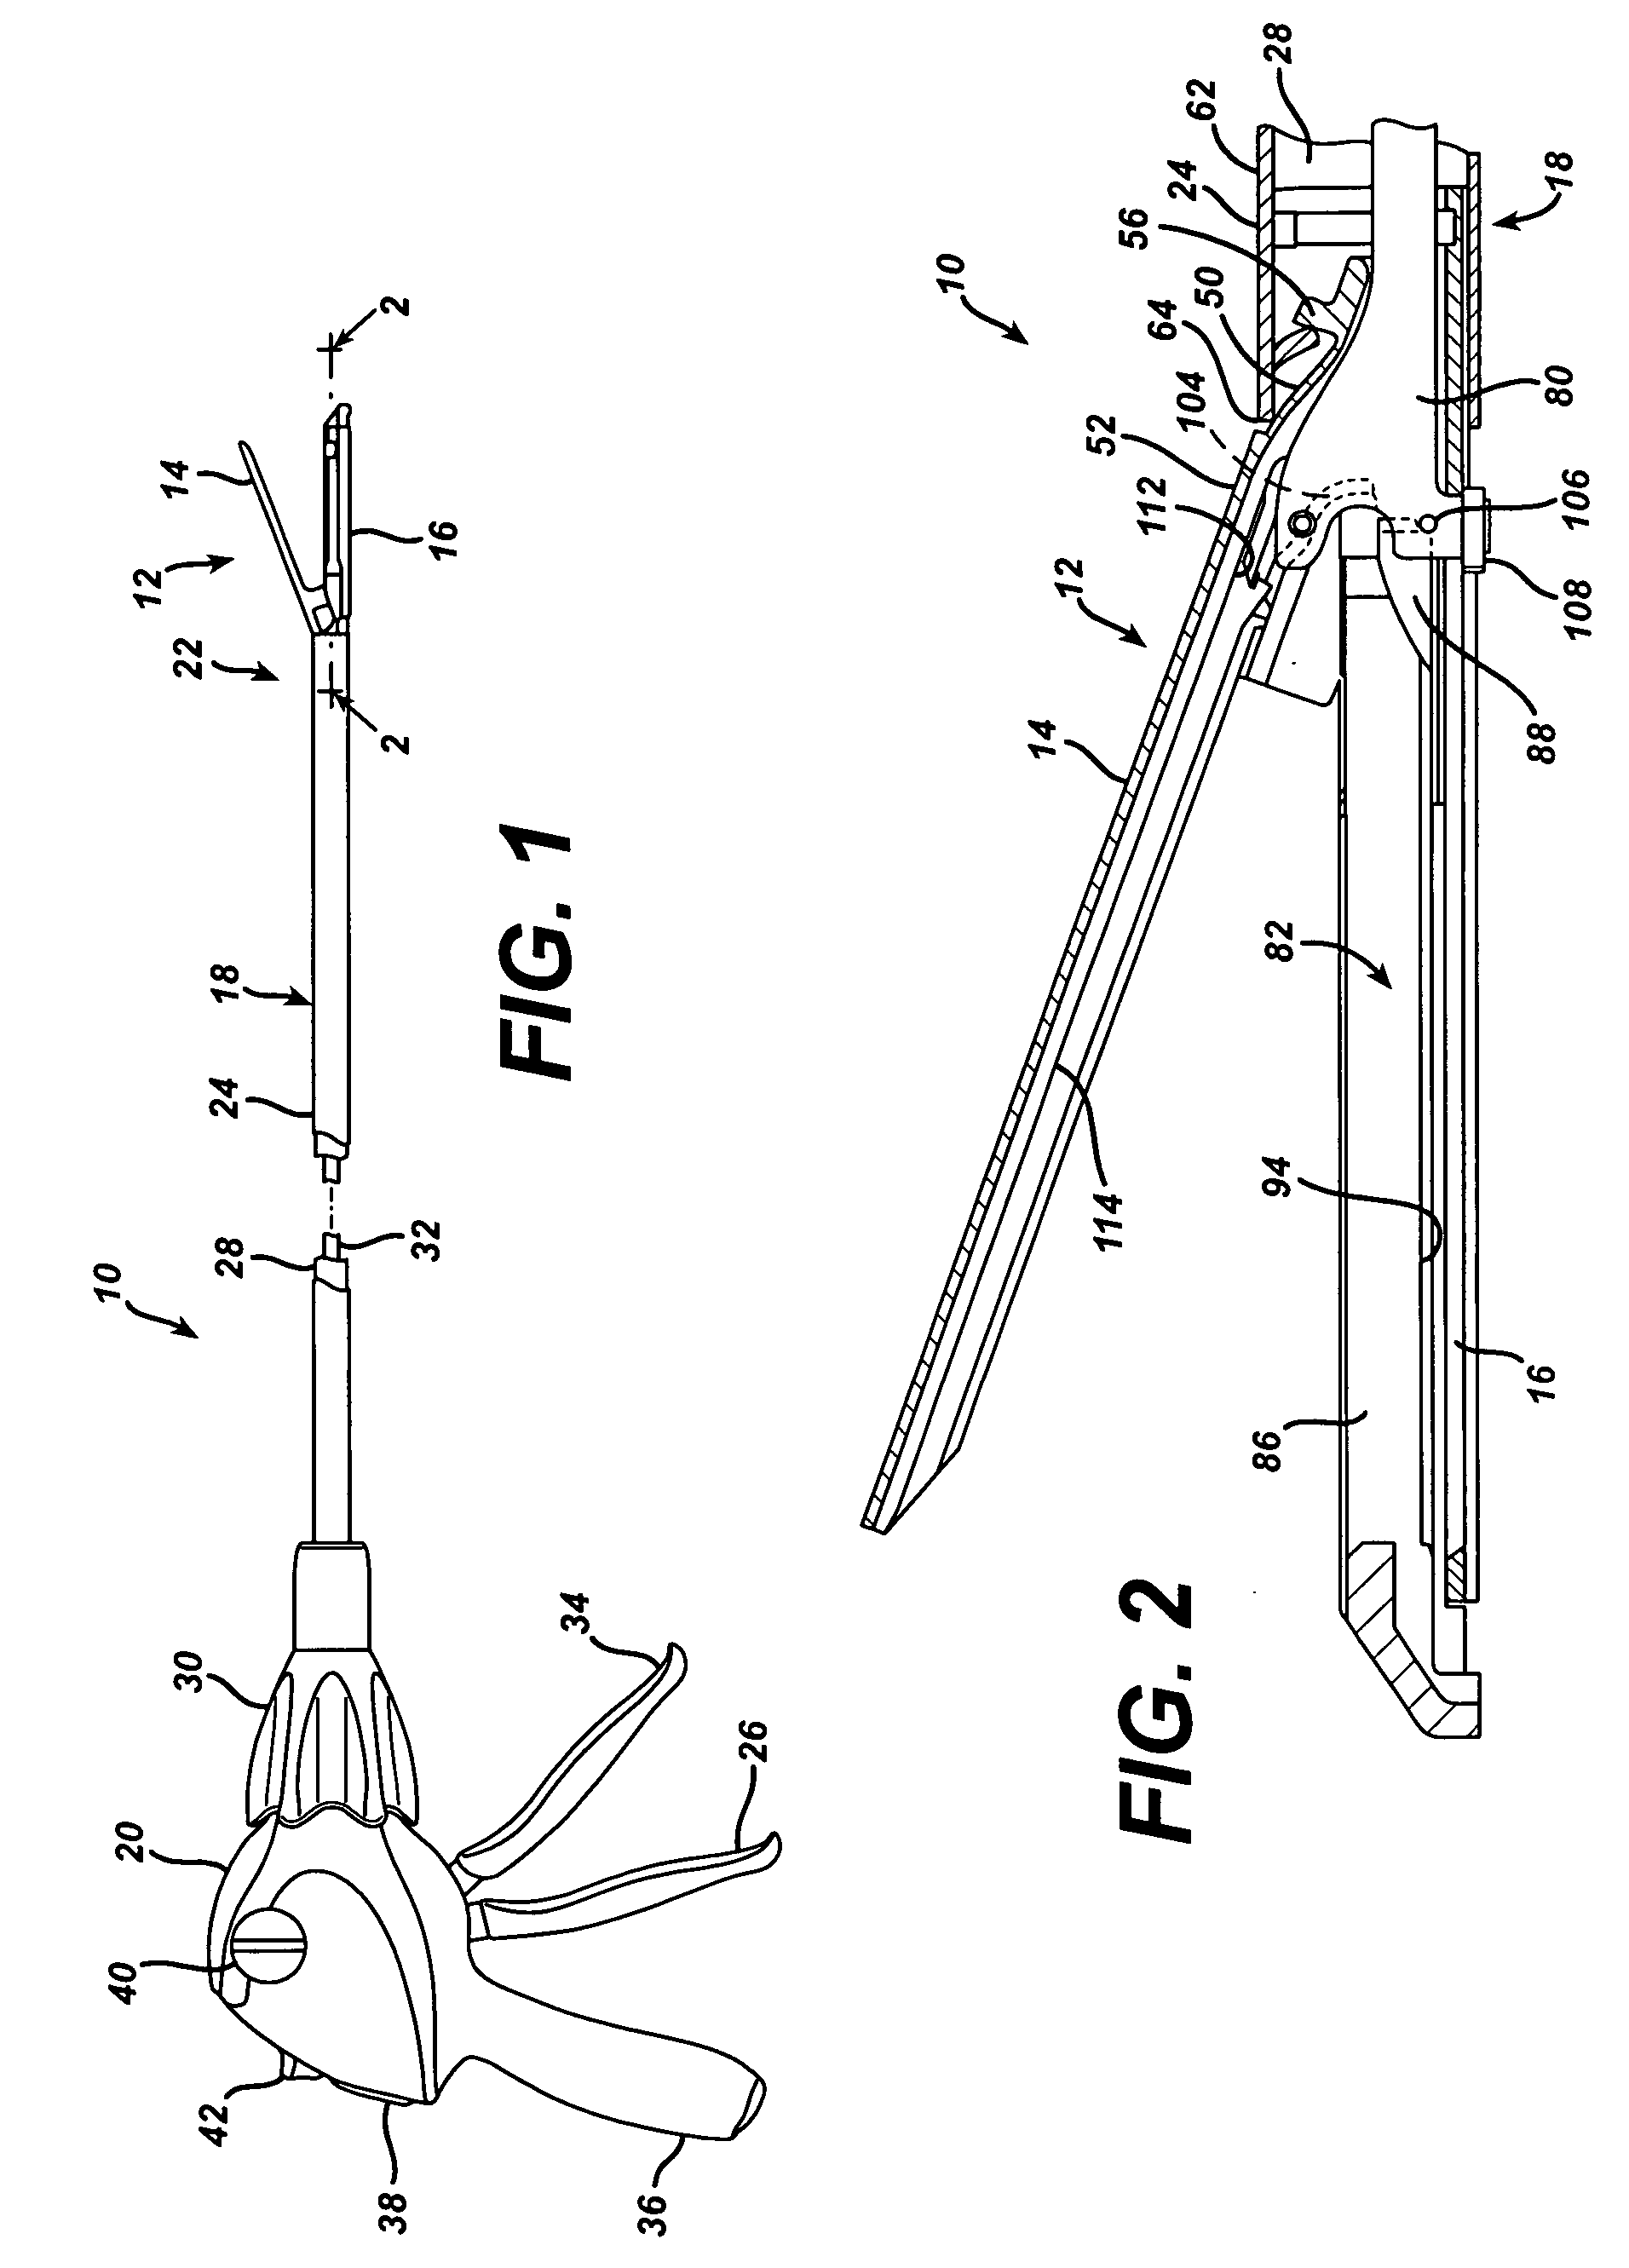 Surgical stapling instrument incorporating a multistroke firing position indicator and retraction mechanism